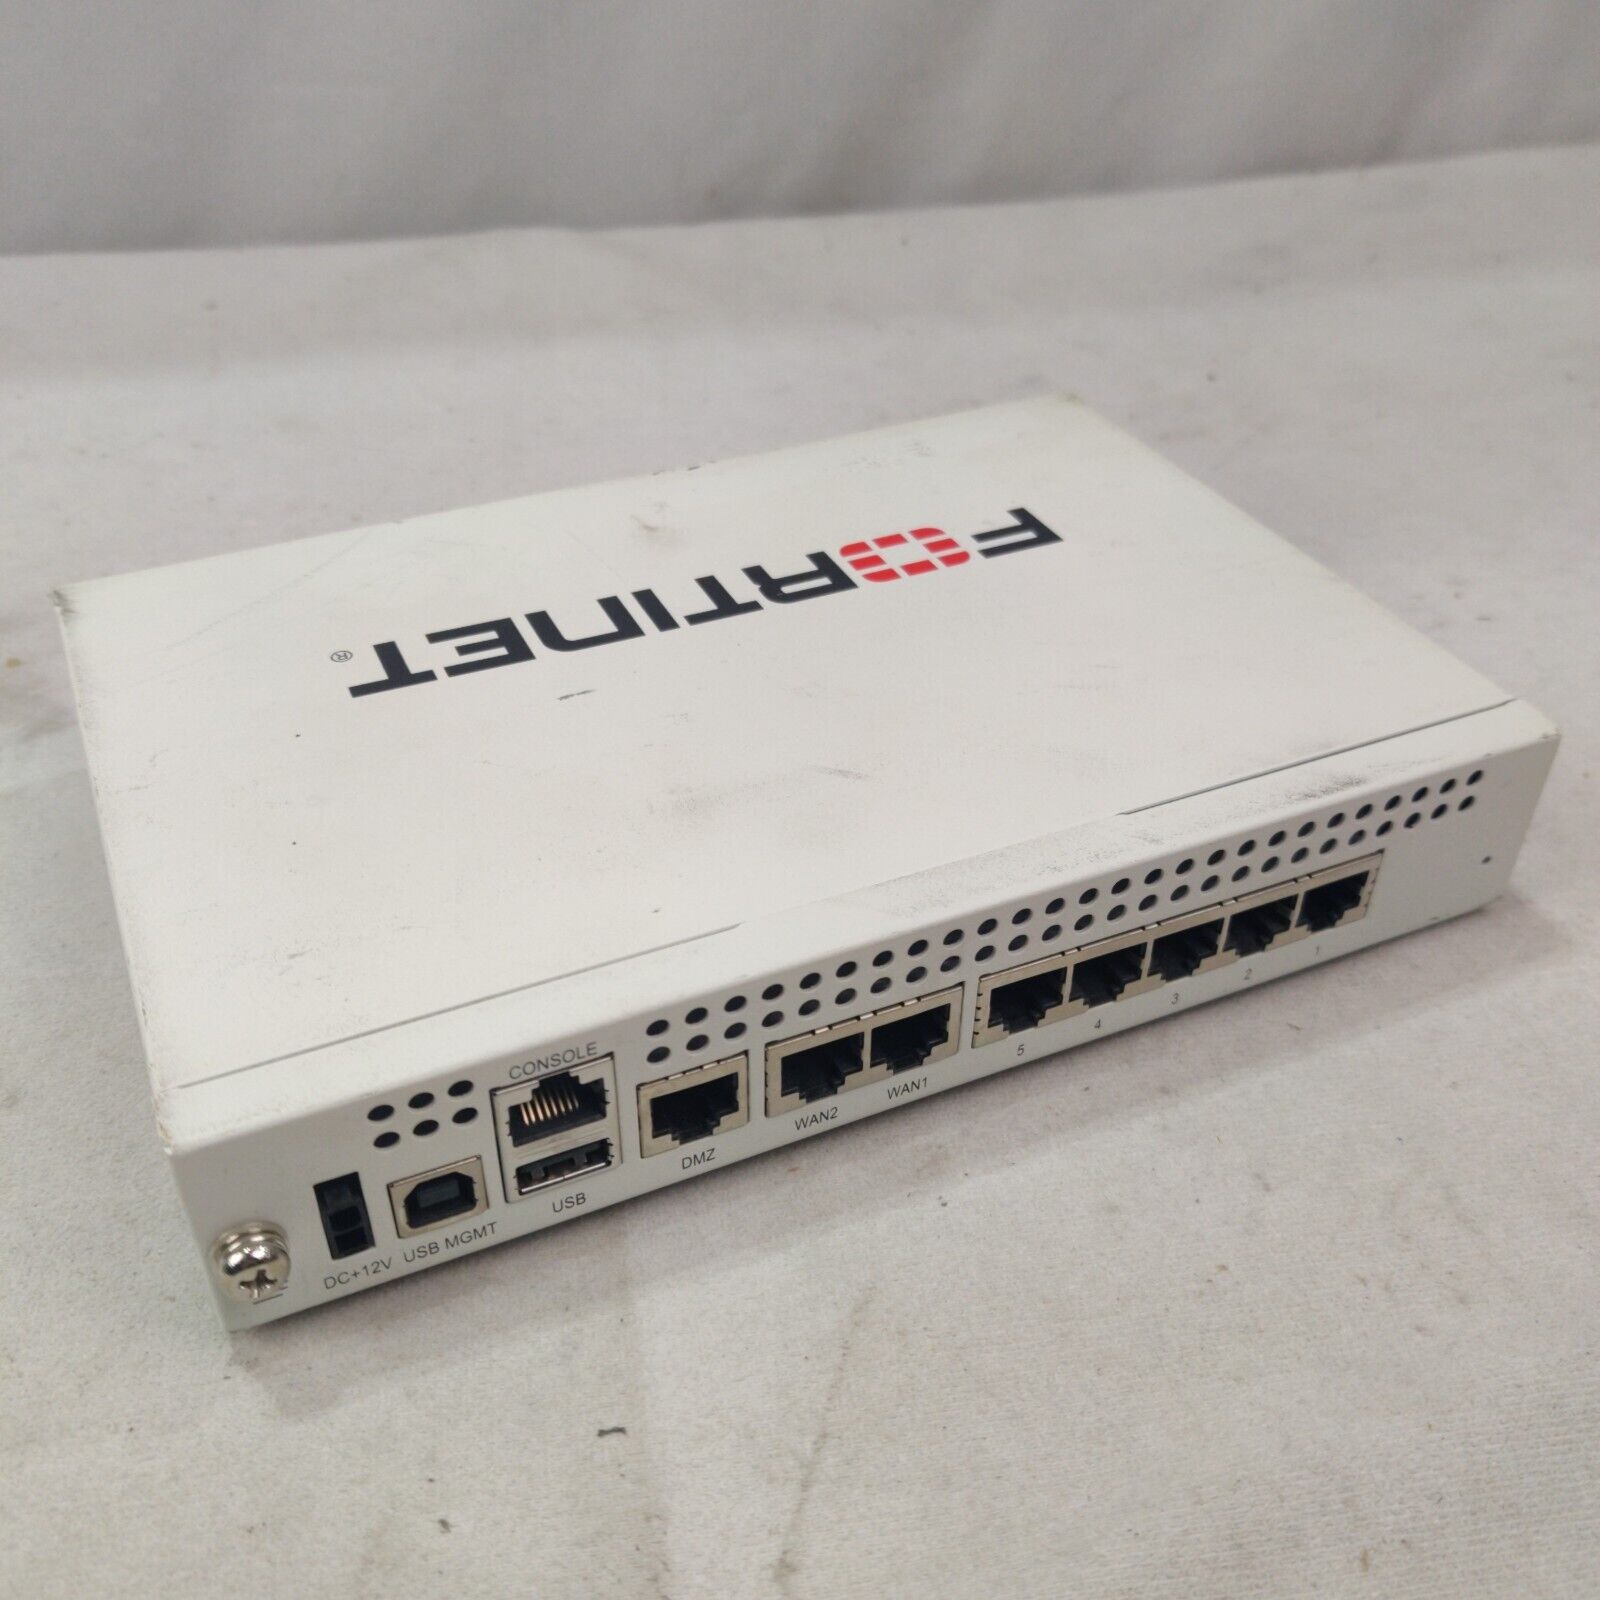 Fortinet FortiGate 60C FG-60C Router Firewall Security Appliance - UNTESTED